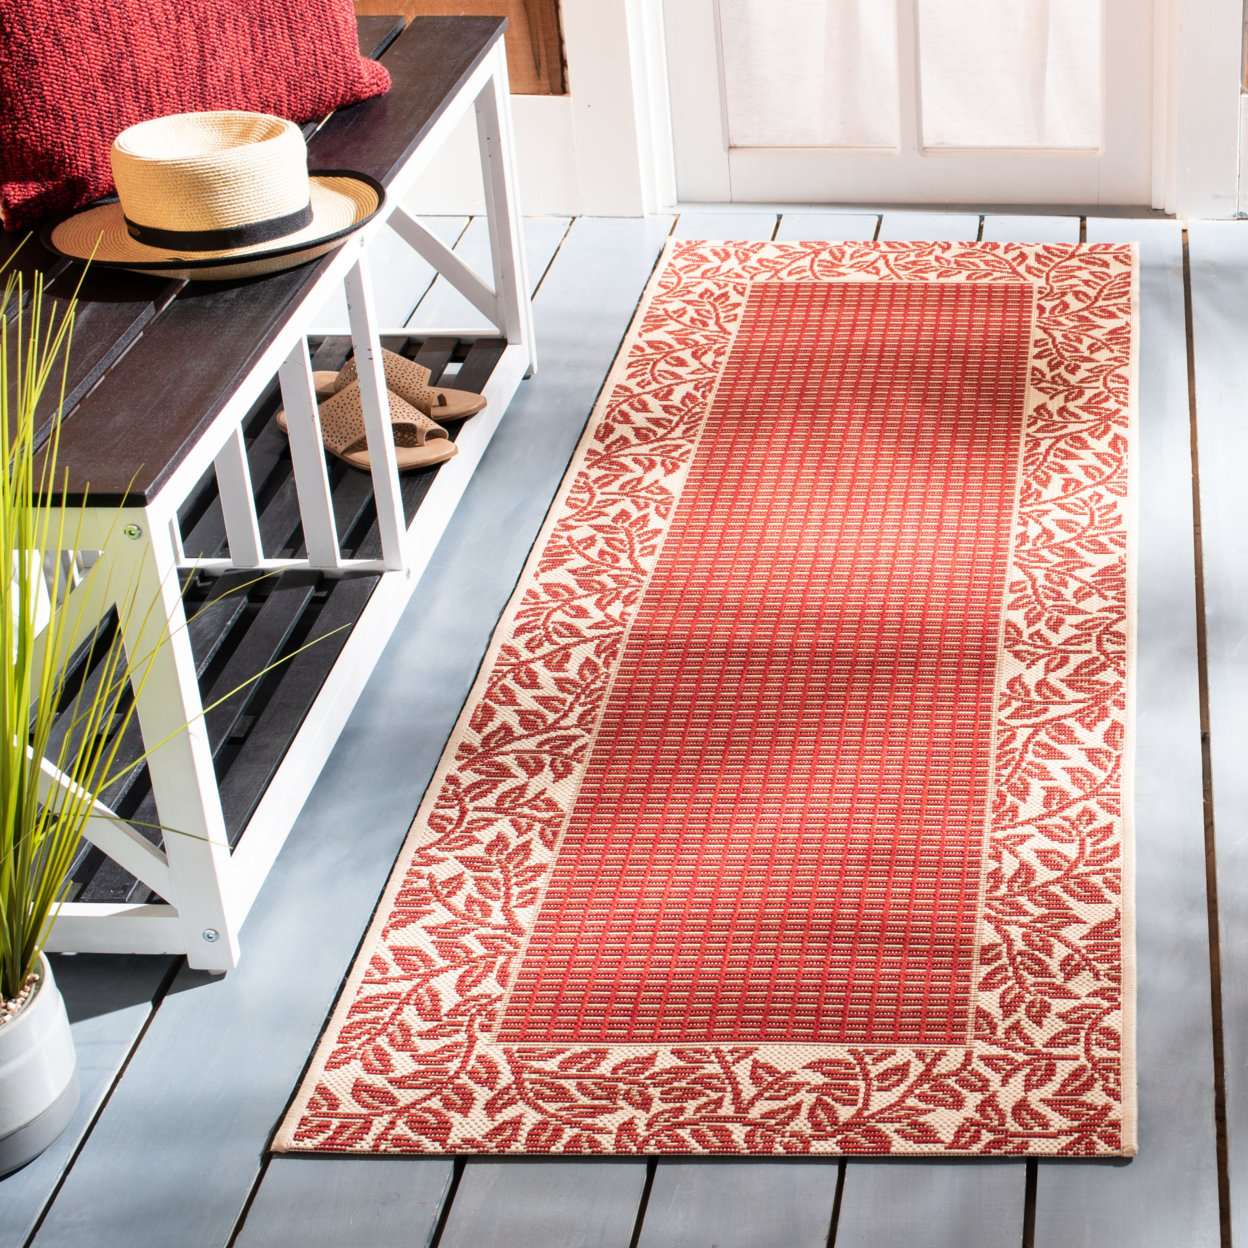 SAFAVIEH Courtyard CY0727-3707 Red / Natural Rug - 6' 7 Square